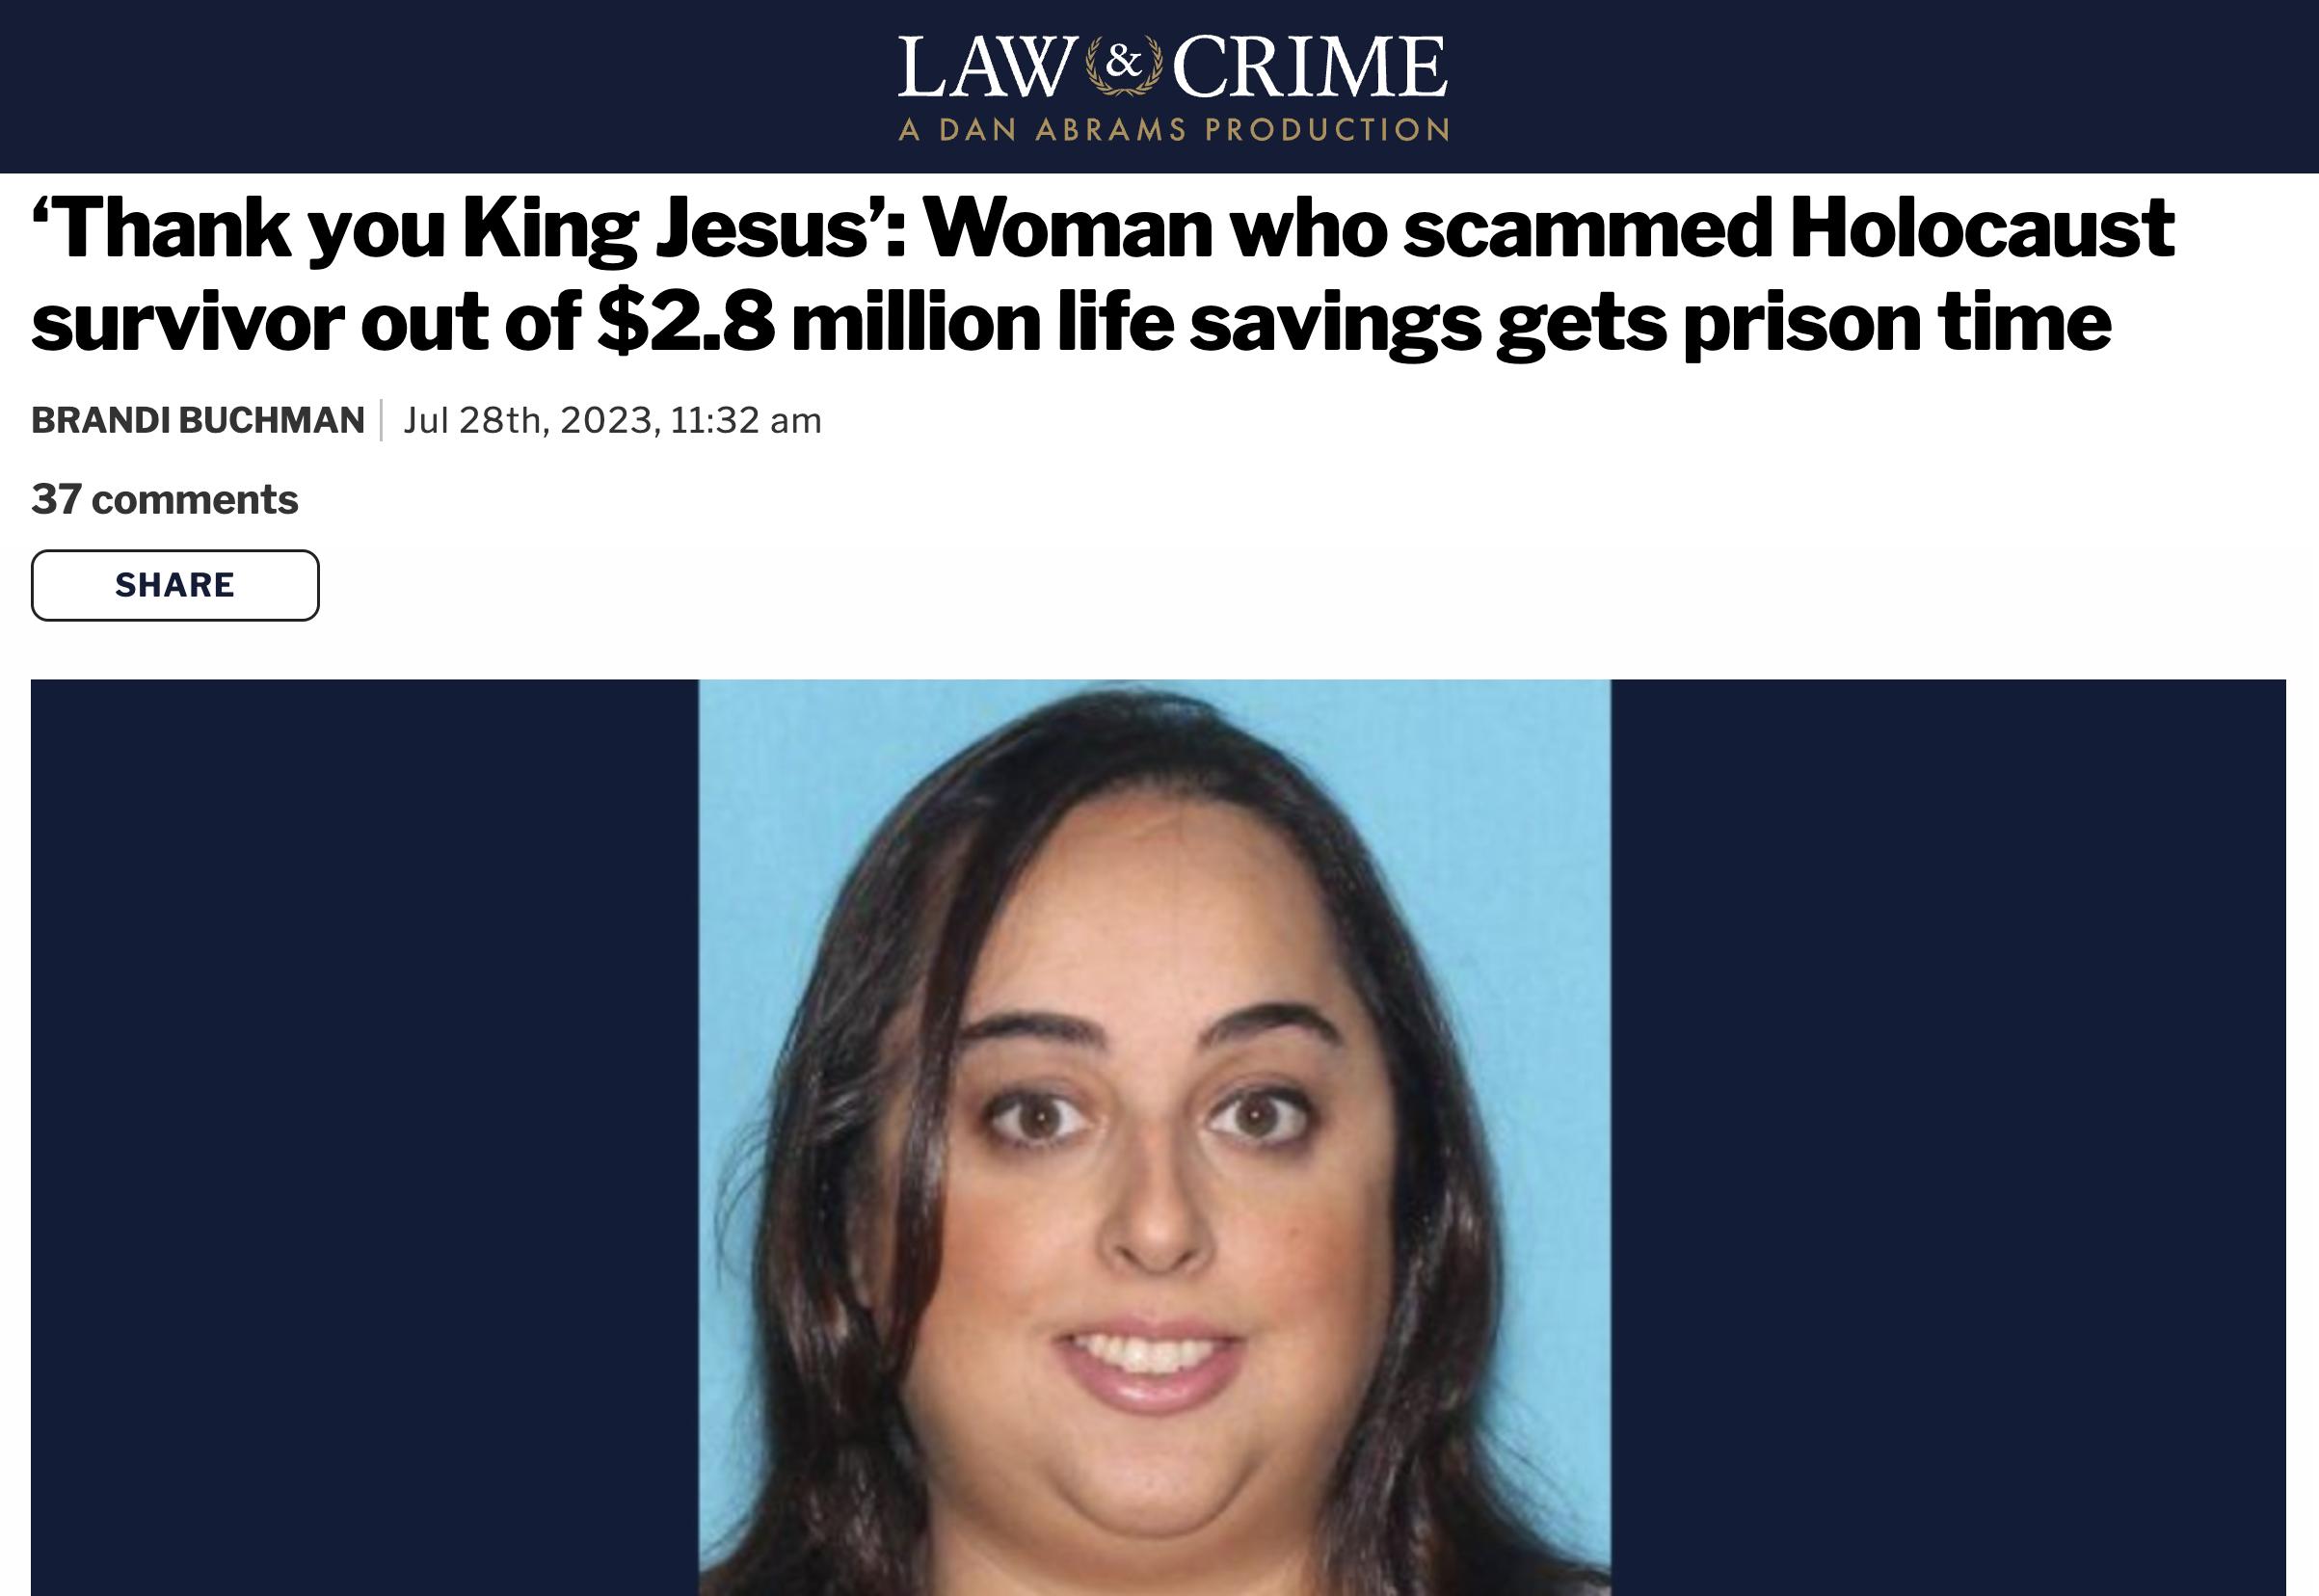 trashy people - - - Law & Crime A Dan Abrams Production 'Thank you King Jesus' Woman who scammed Holocaust survivor out of $2.8 million life savings gets prison time Brandi Buchman| Jul 28th, 2023, 37